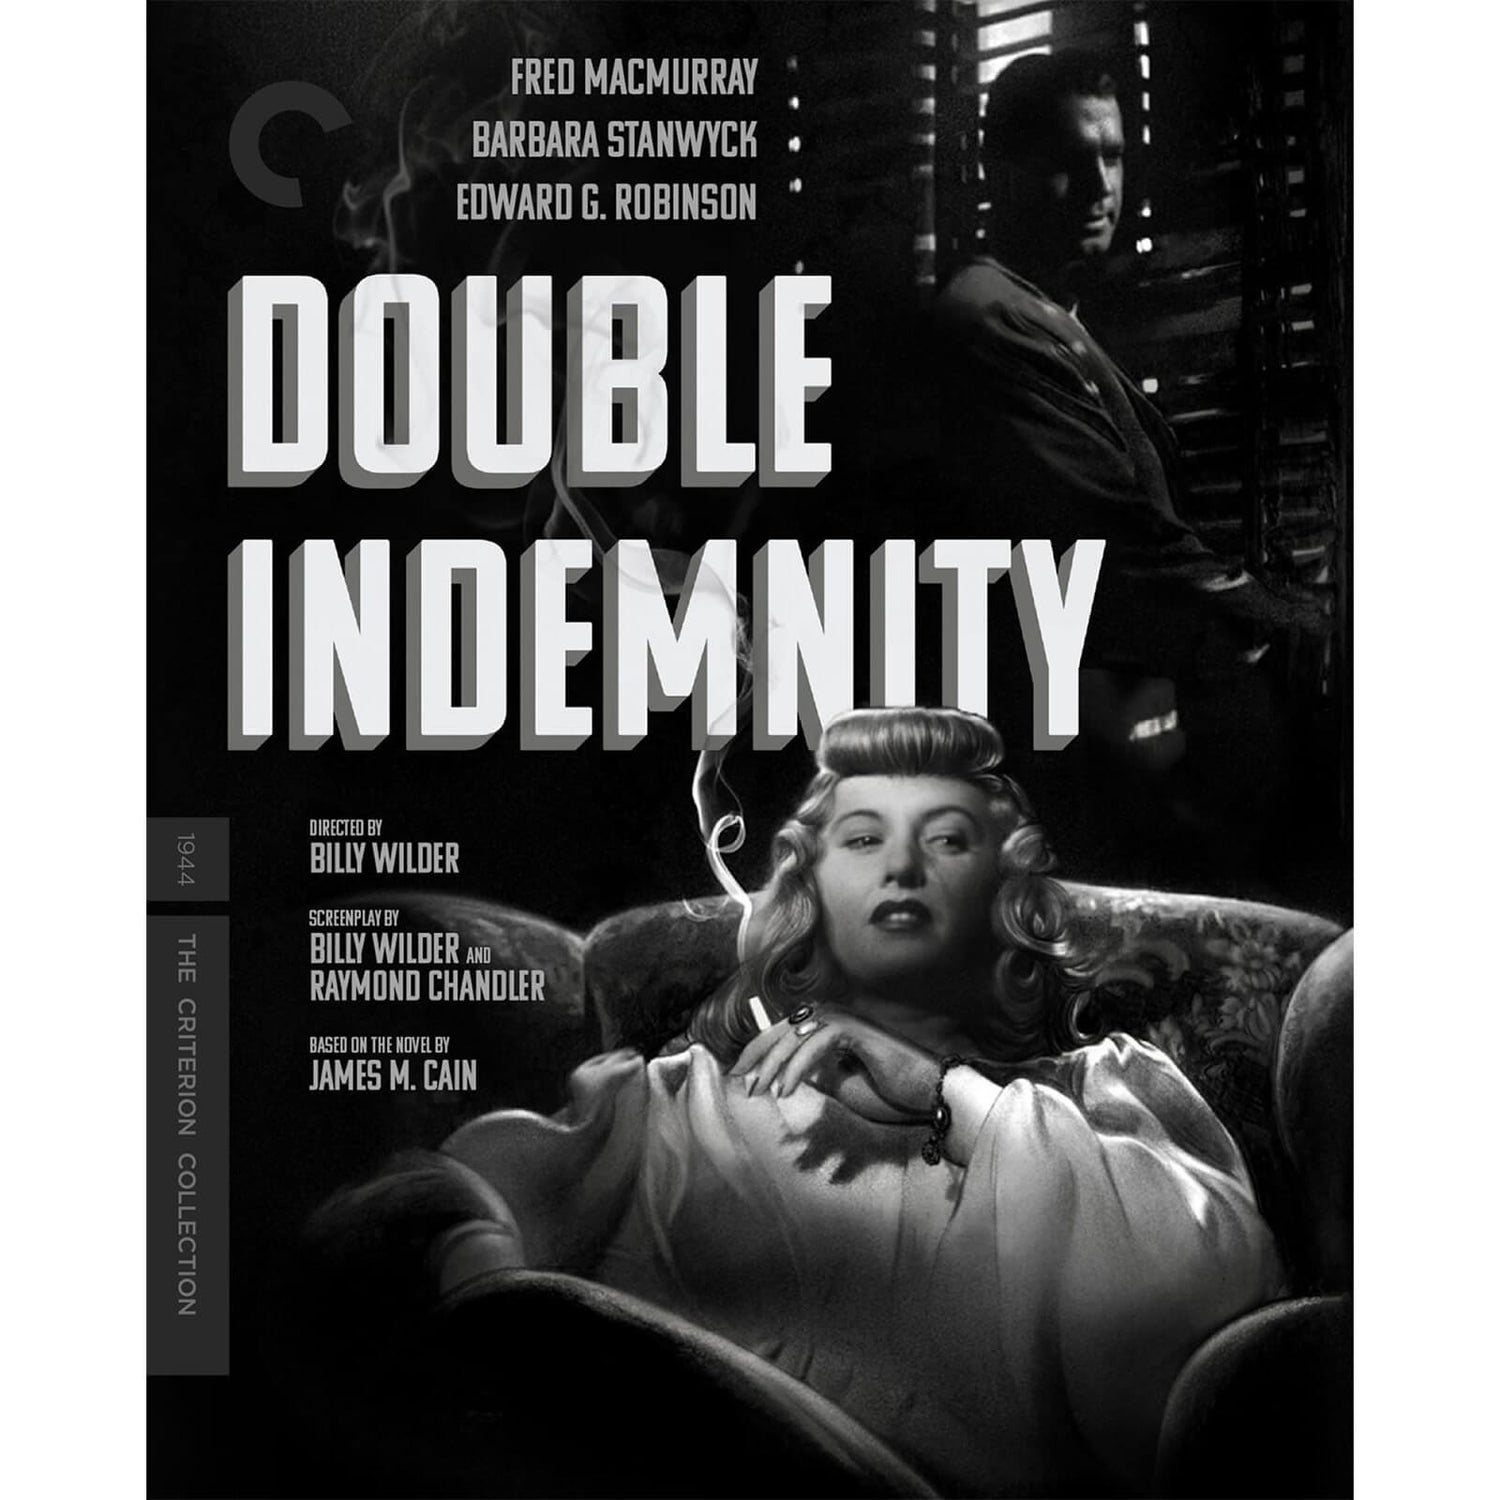 Double Indemnity - The Criterion Collection 4K Ultra HD (Includes Blu-ray)